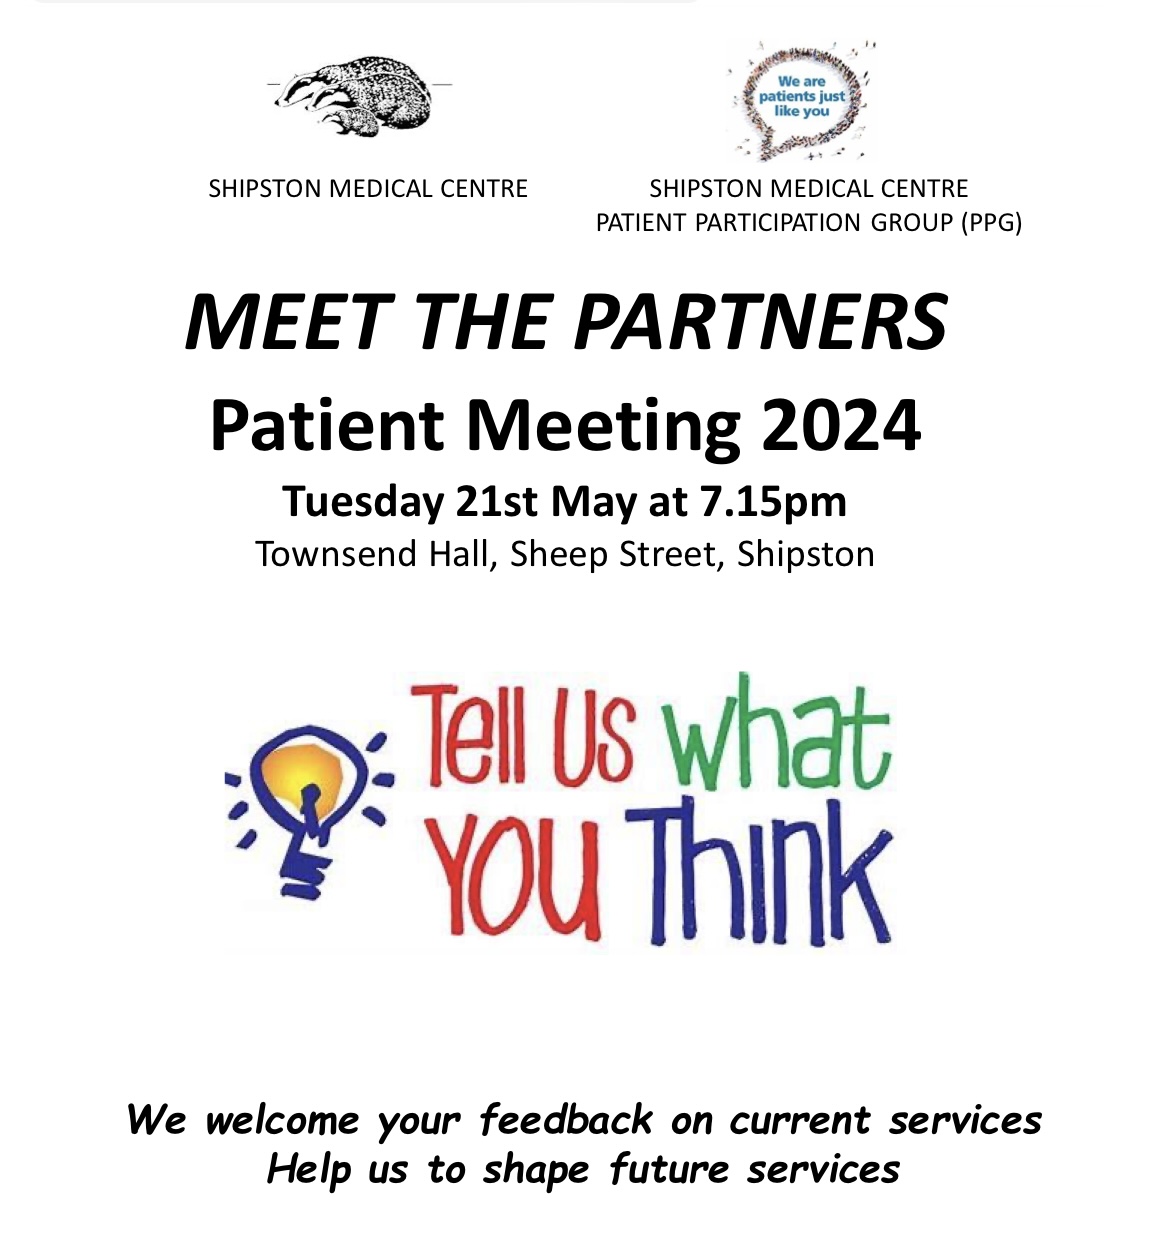 Shipston Medical Centre Patient Meeting - Tuesday 21 May at Townsend Hall, Shipston on Stour